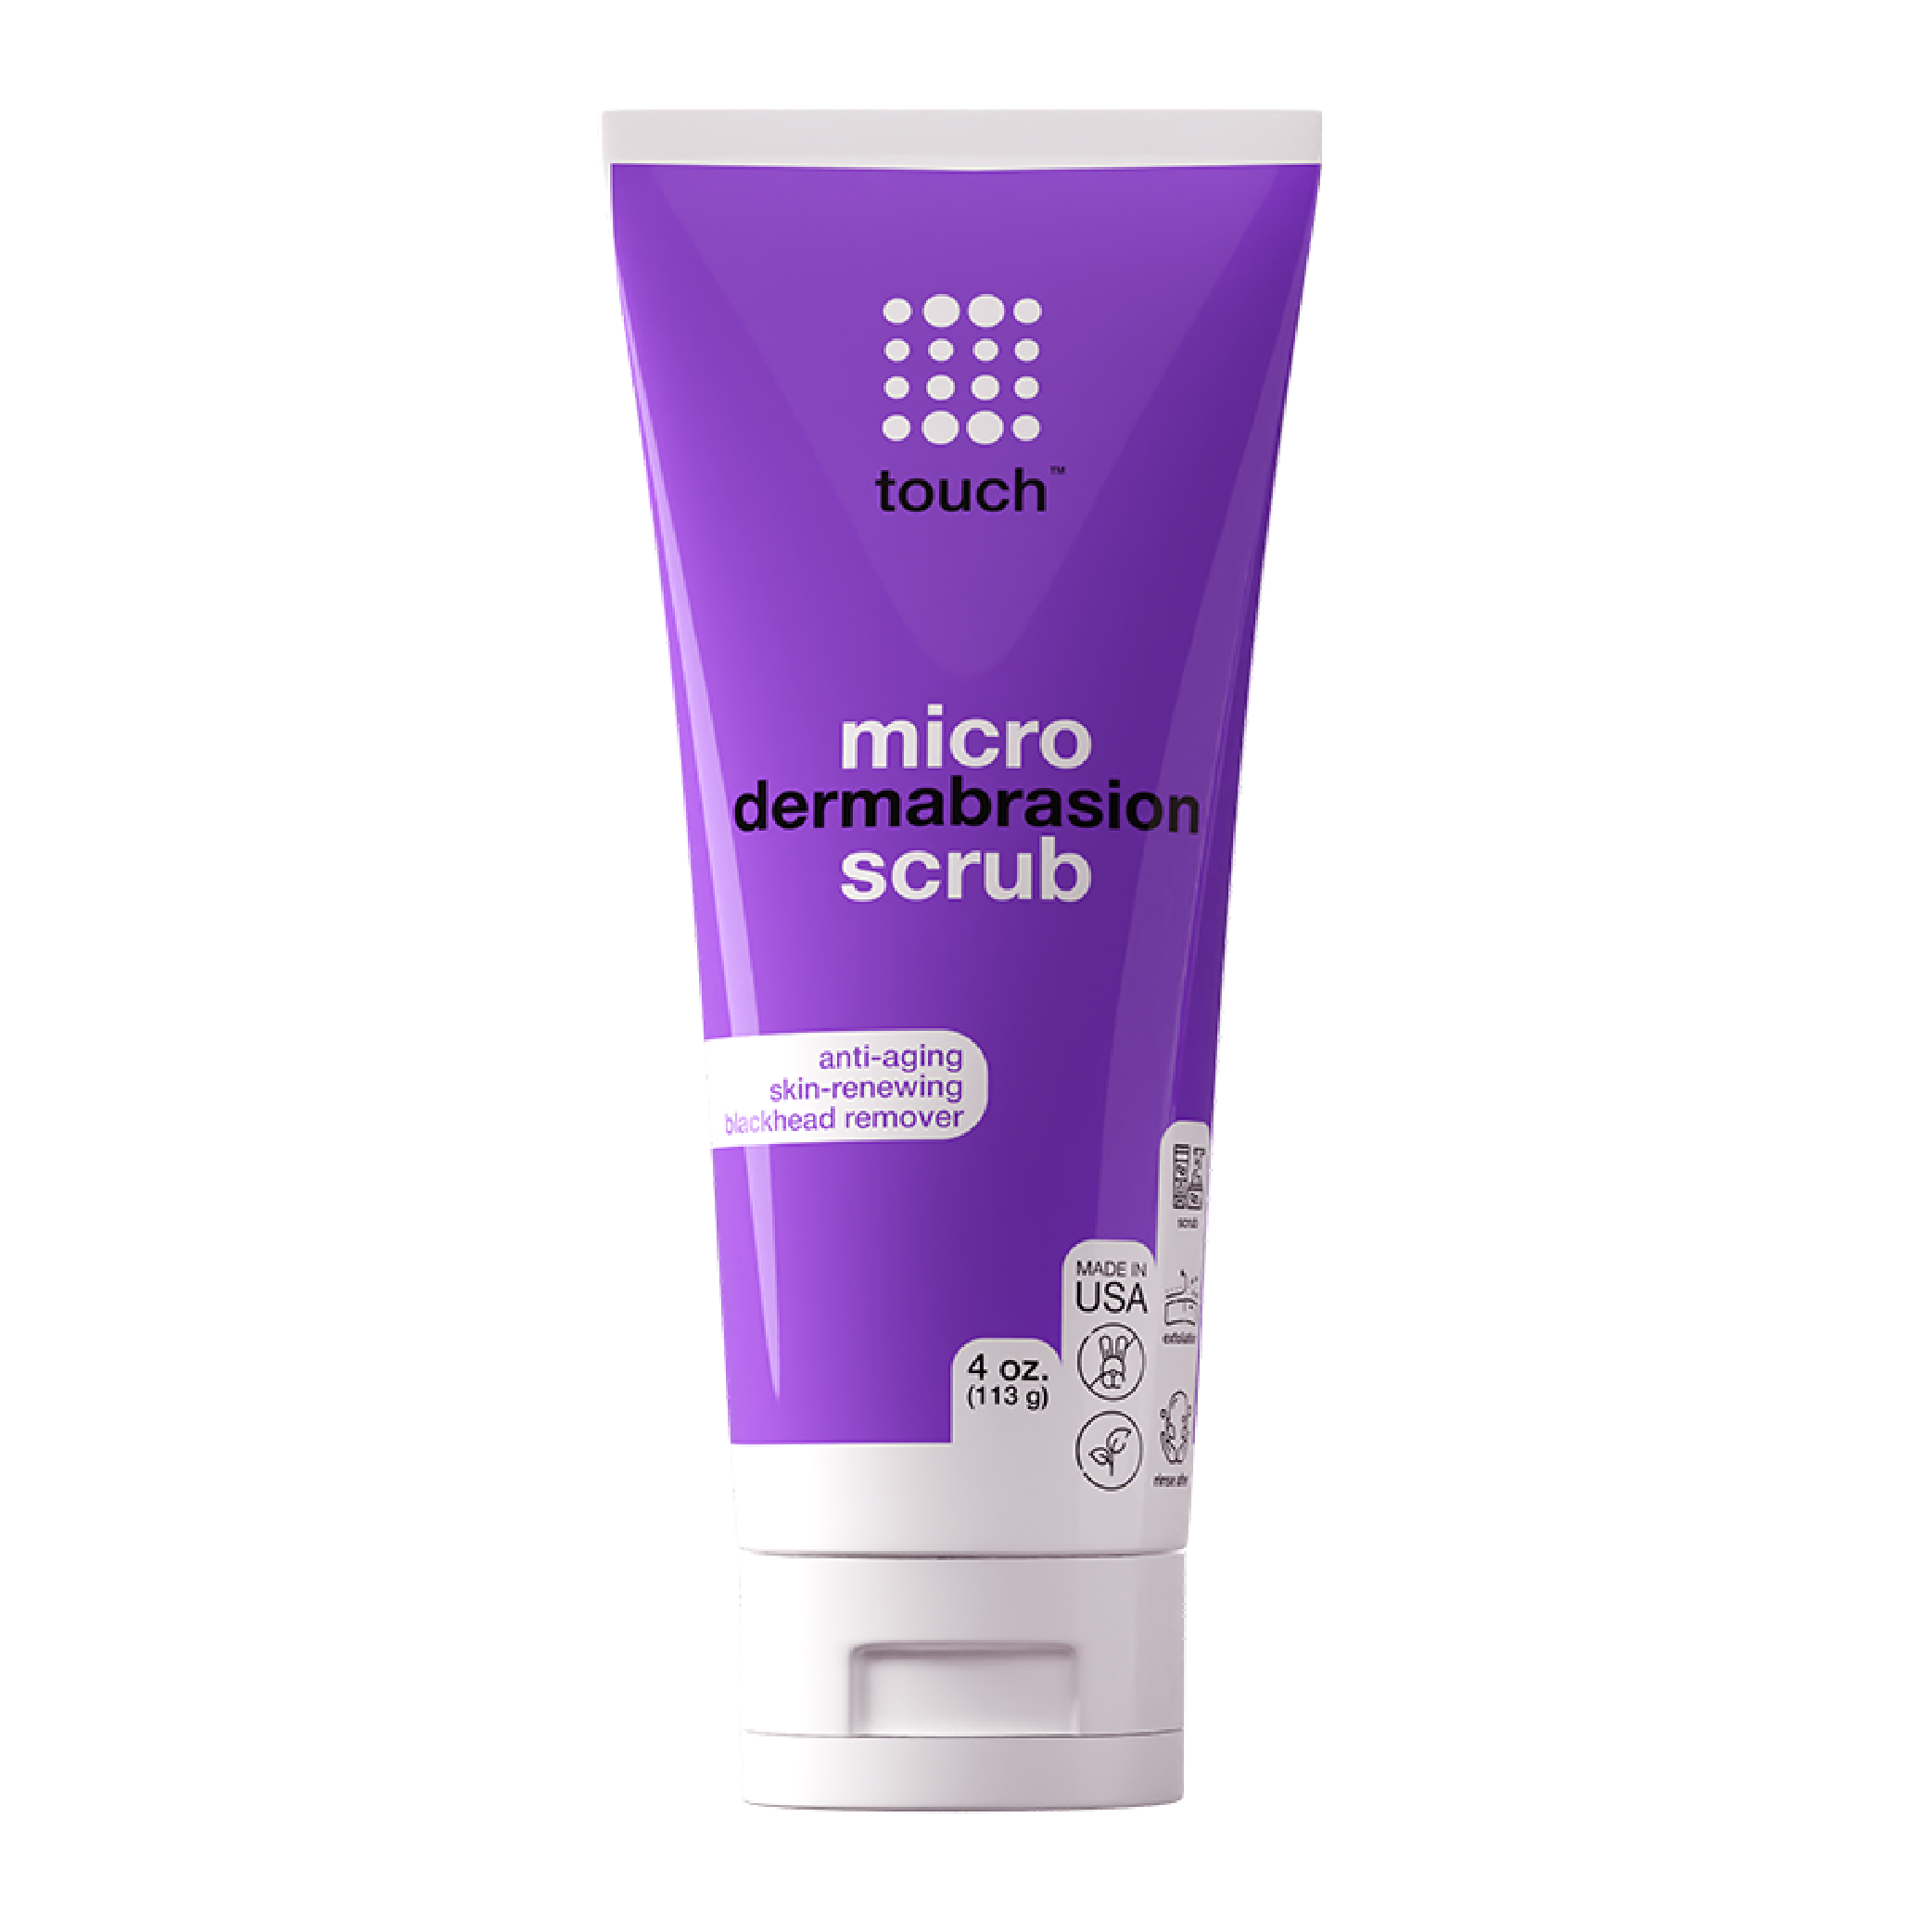 Microdermabrasion Facial Scrub and Face Exfoliator - Exfoliating Face Scrub Polish Cream with Dermatologist Crystals for Anti-Aging, Acne Scars, Dullness, Wrinkles, and Pores - Large 4 Ounce Size - image 1 of 7